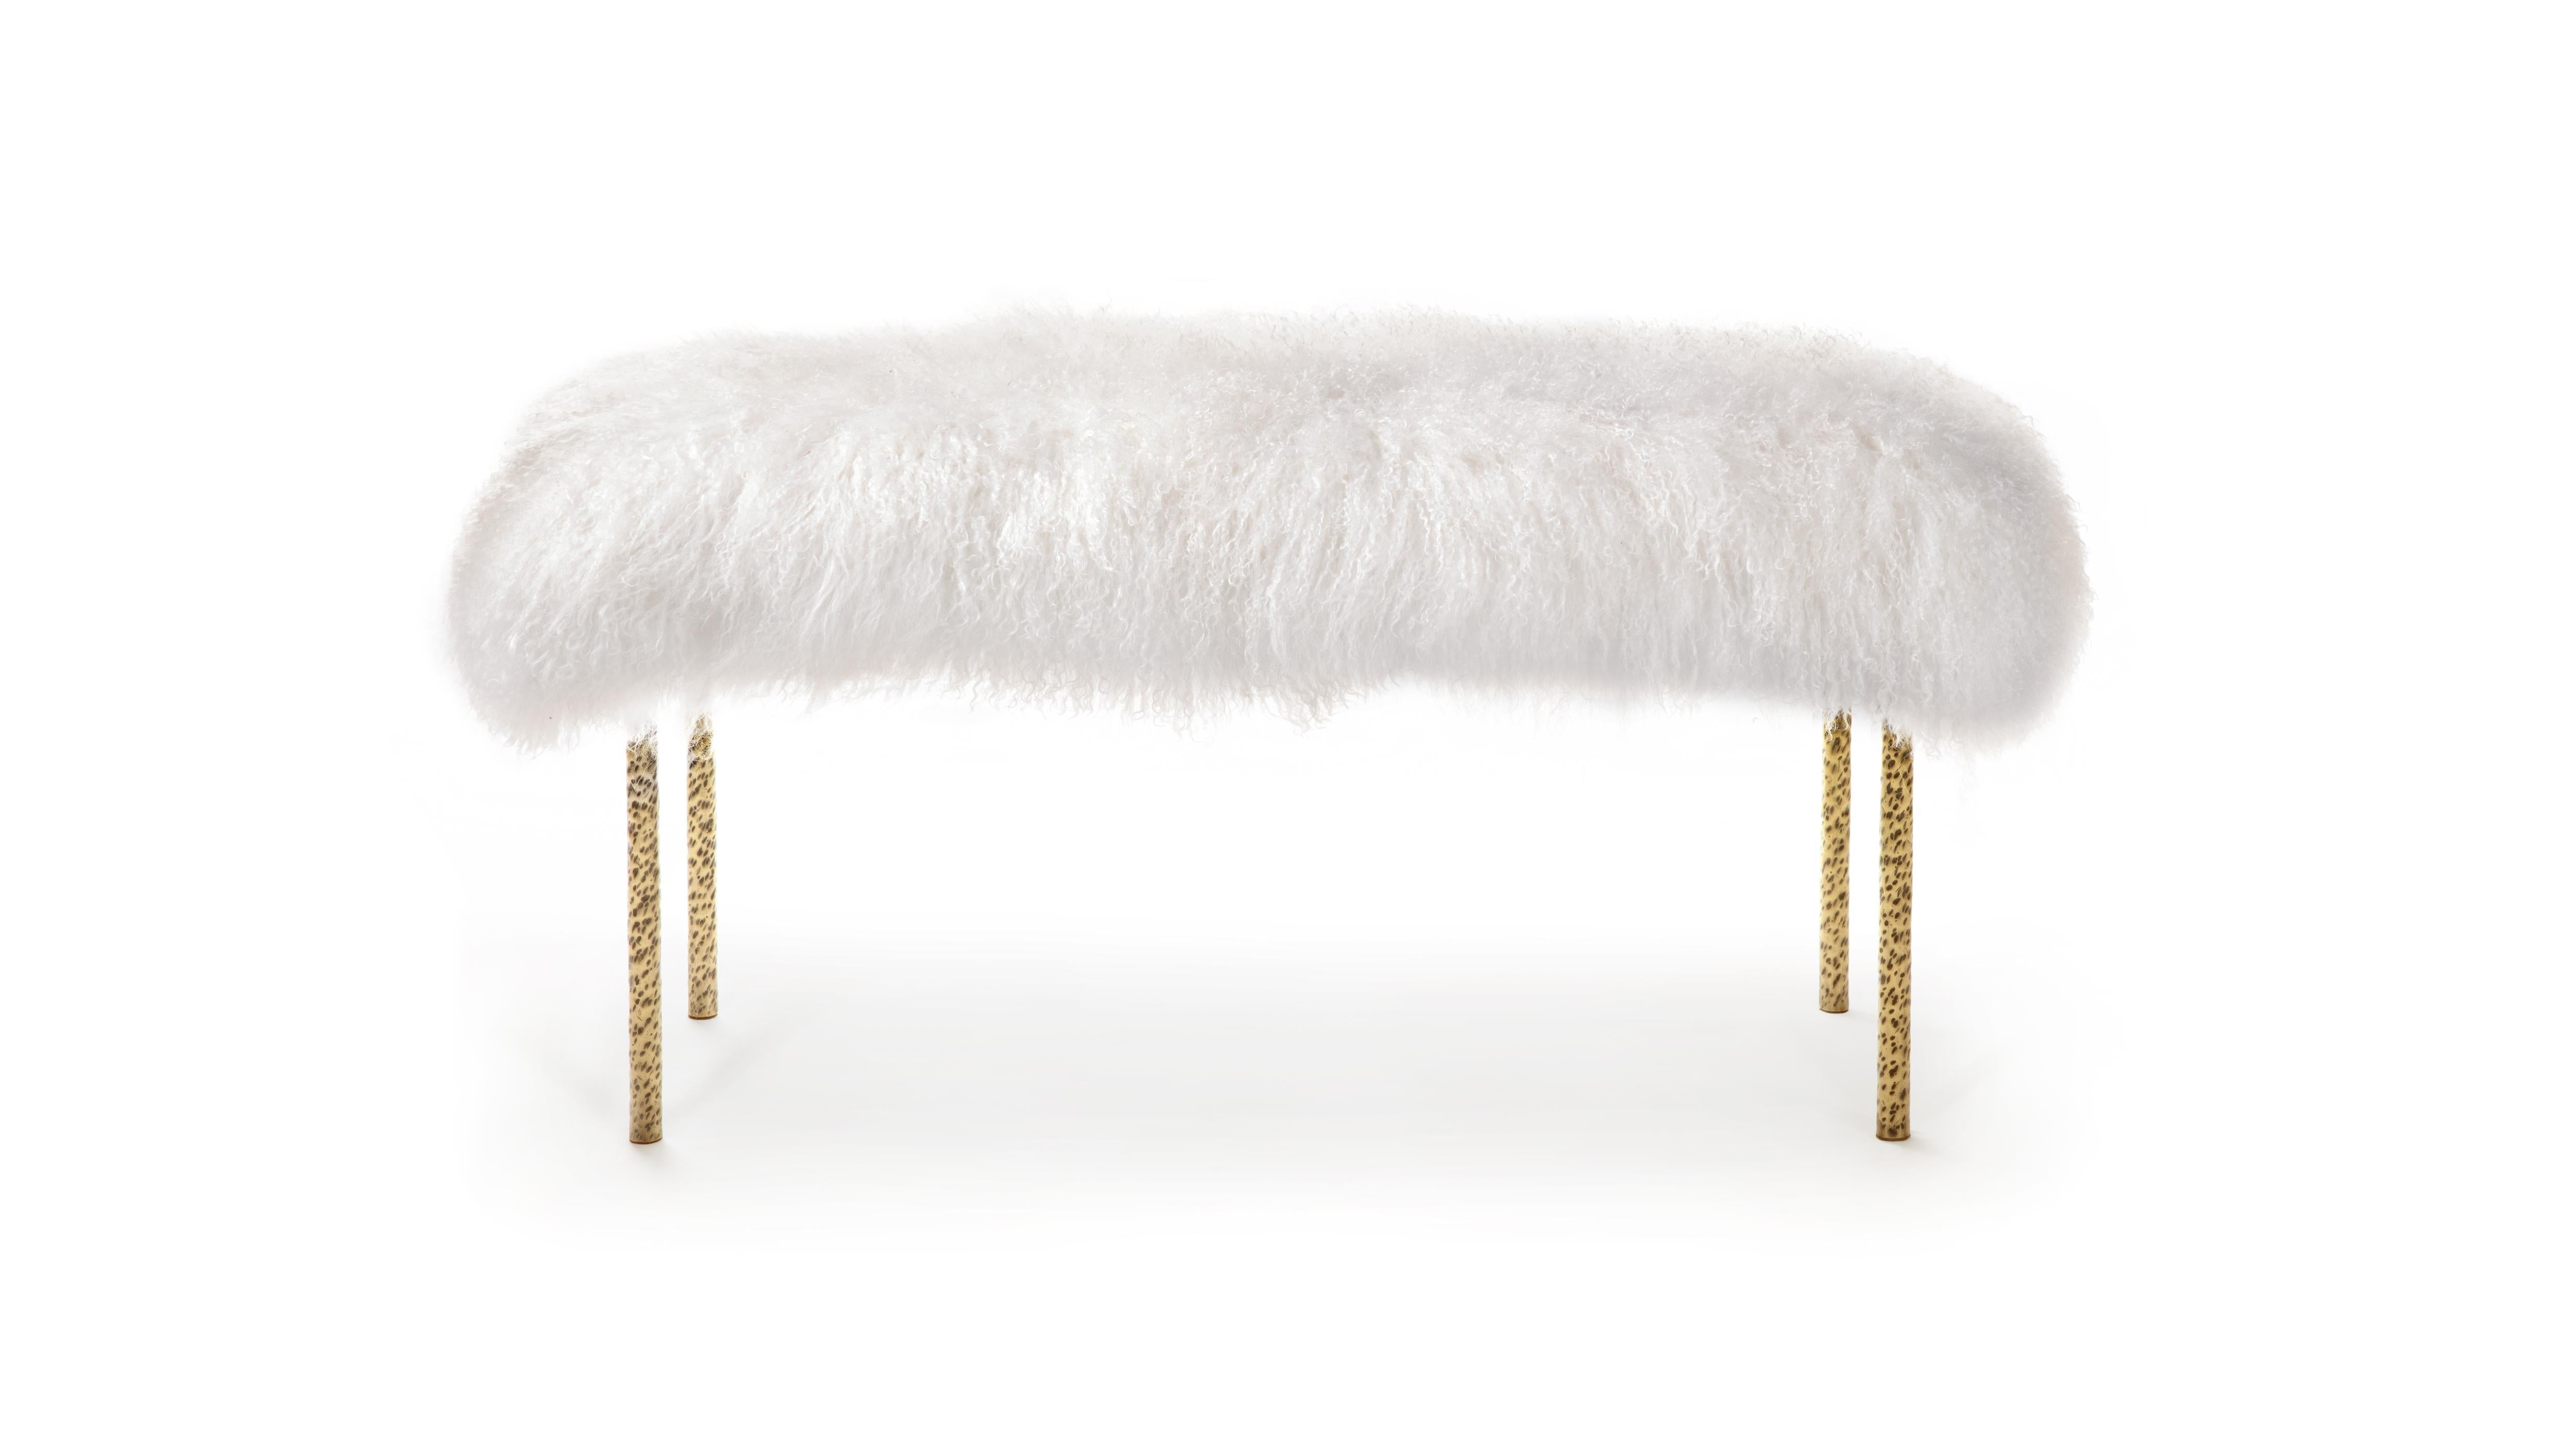 Tree Branches Long Bench by InsidherLand
Dimensions: D 42 x W 100 x H 48 cm.
Materials: Mongolian Lamb fur Ref. White, hammered brass with patinated effect.
10 kg.
Available in other finishes.

The Tree Branches long bench is entirely handcrafted in